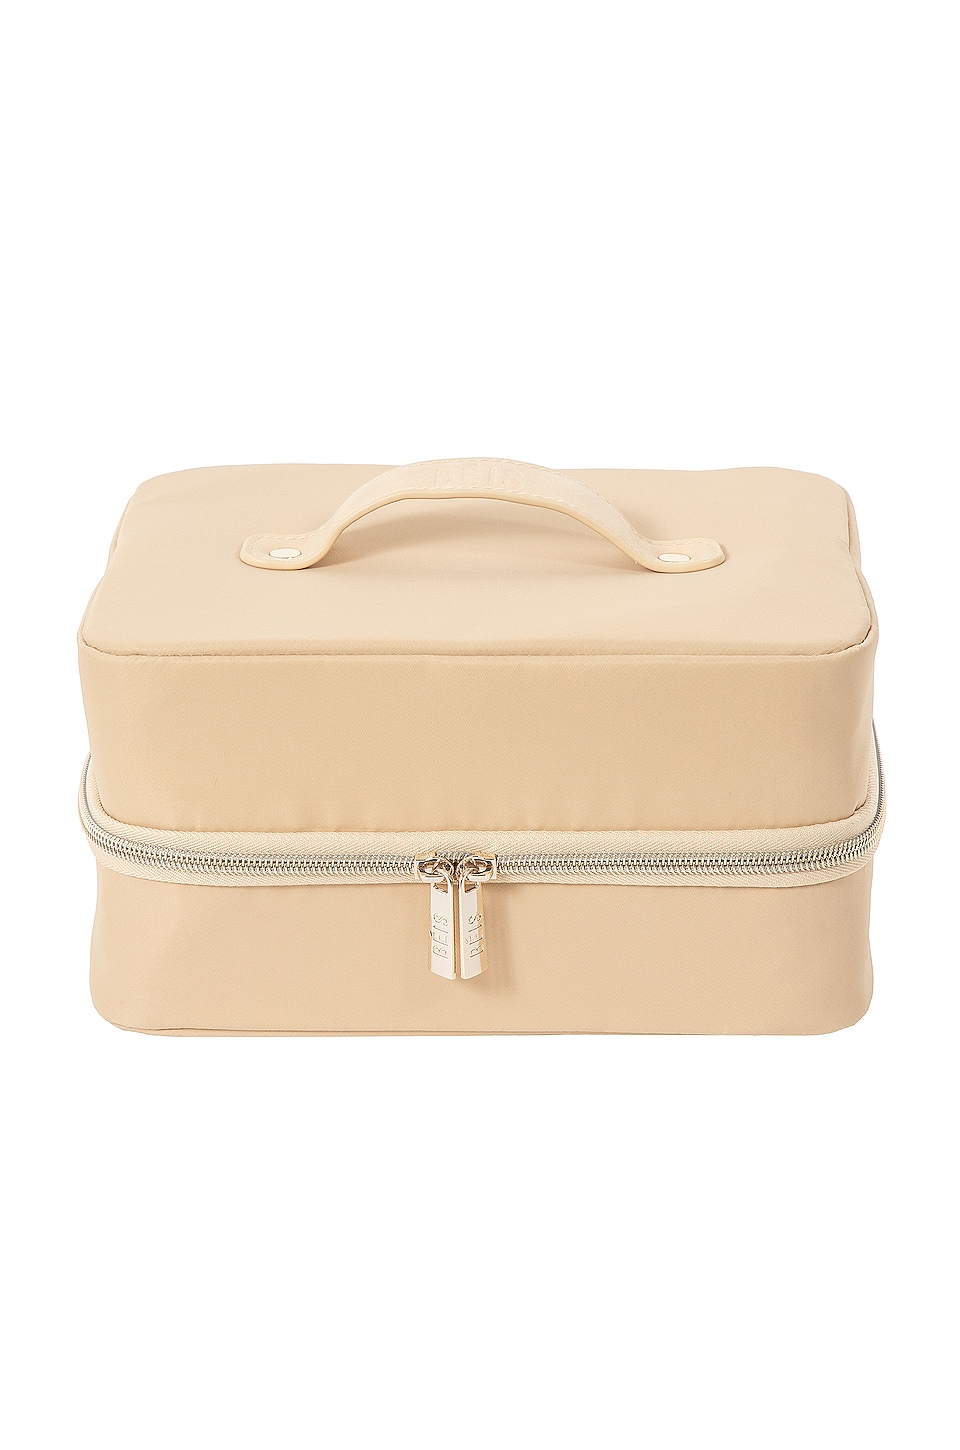 Image 1 of The Hanging Cosmetic Case in Beige